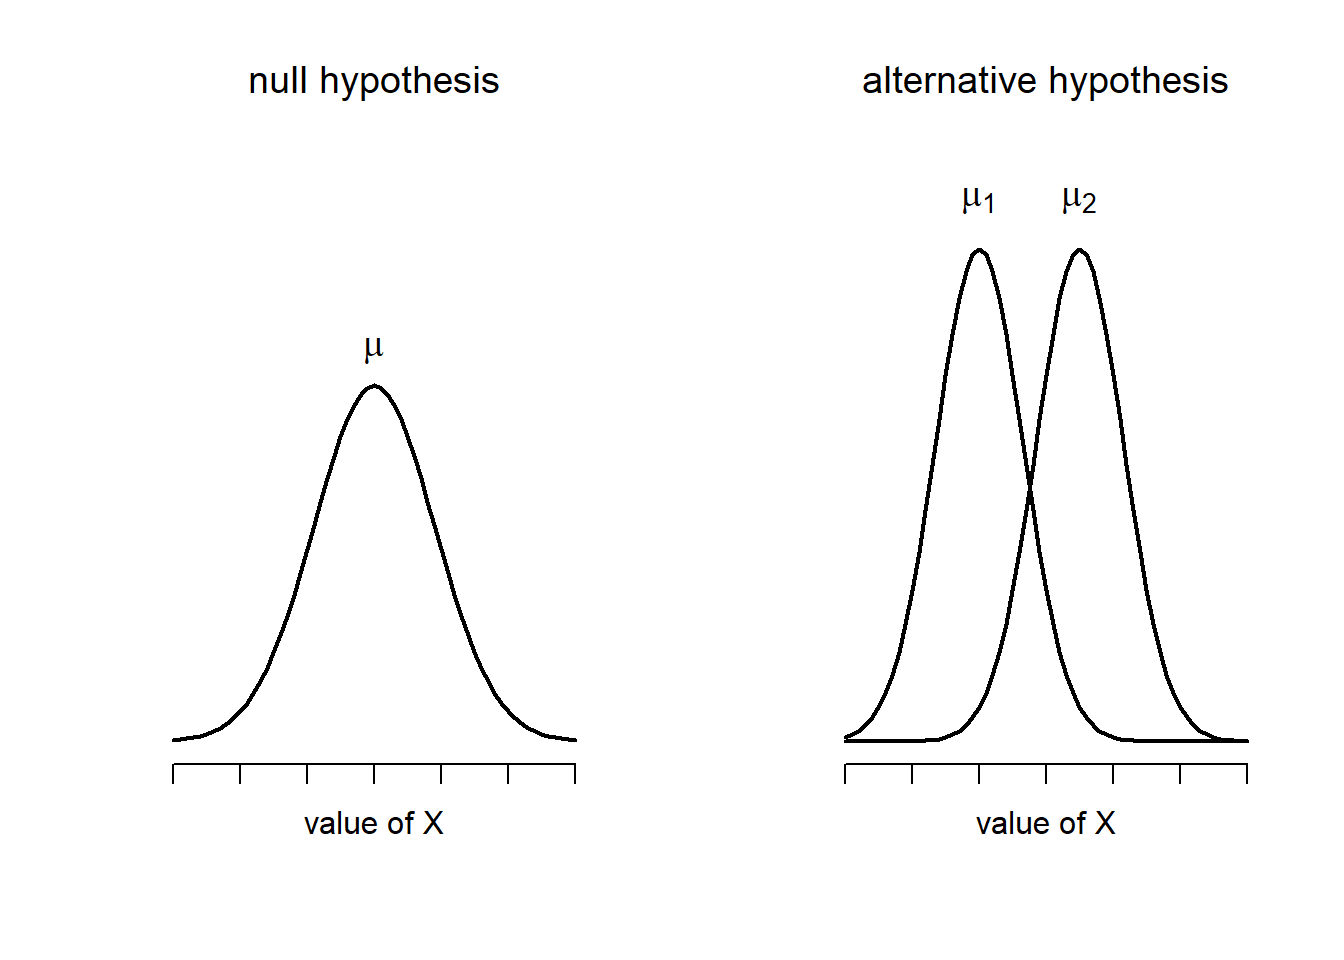 Graphical illustration of the null and alternative hypotheses assumed by the Student $t$-test. The null hypothesis assumes that both groups have the same mean $\mu$, whereas the alternative assumes that they have different means $\mu_1$ and $\mu_2$. Notice that it is assumed that the population distributions are normal, and that, although the alternative hypothesis allows the group to have different means, it assumes they have the same standard deviation